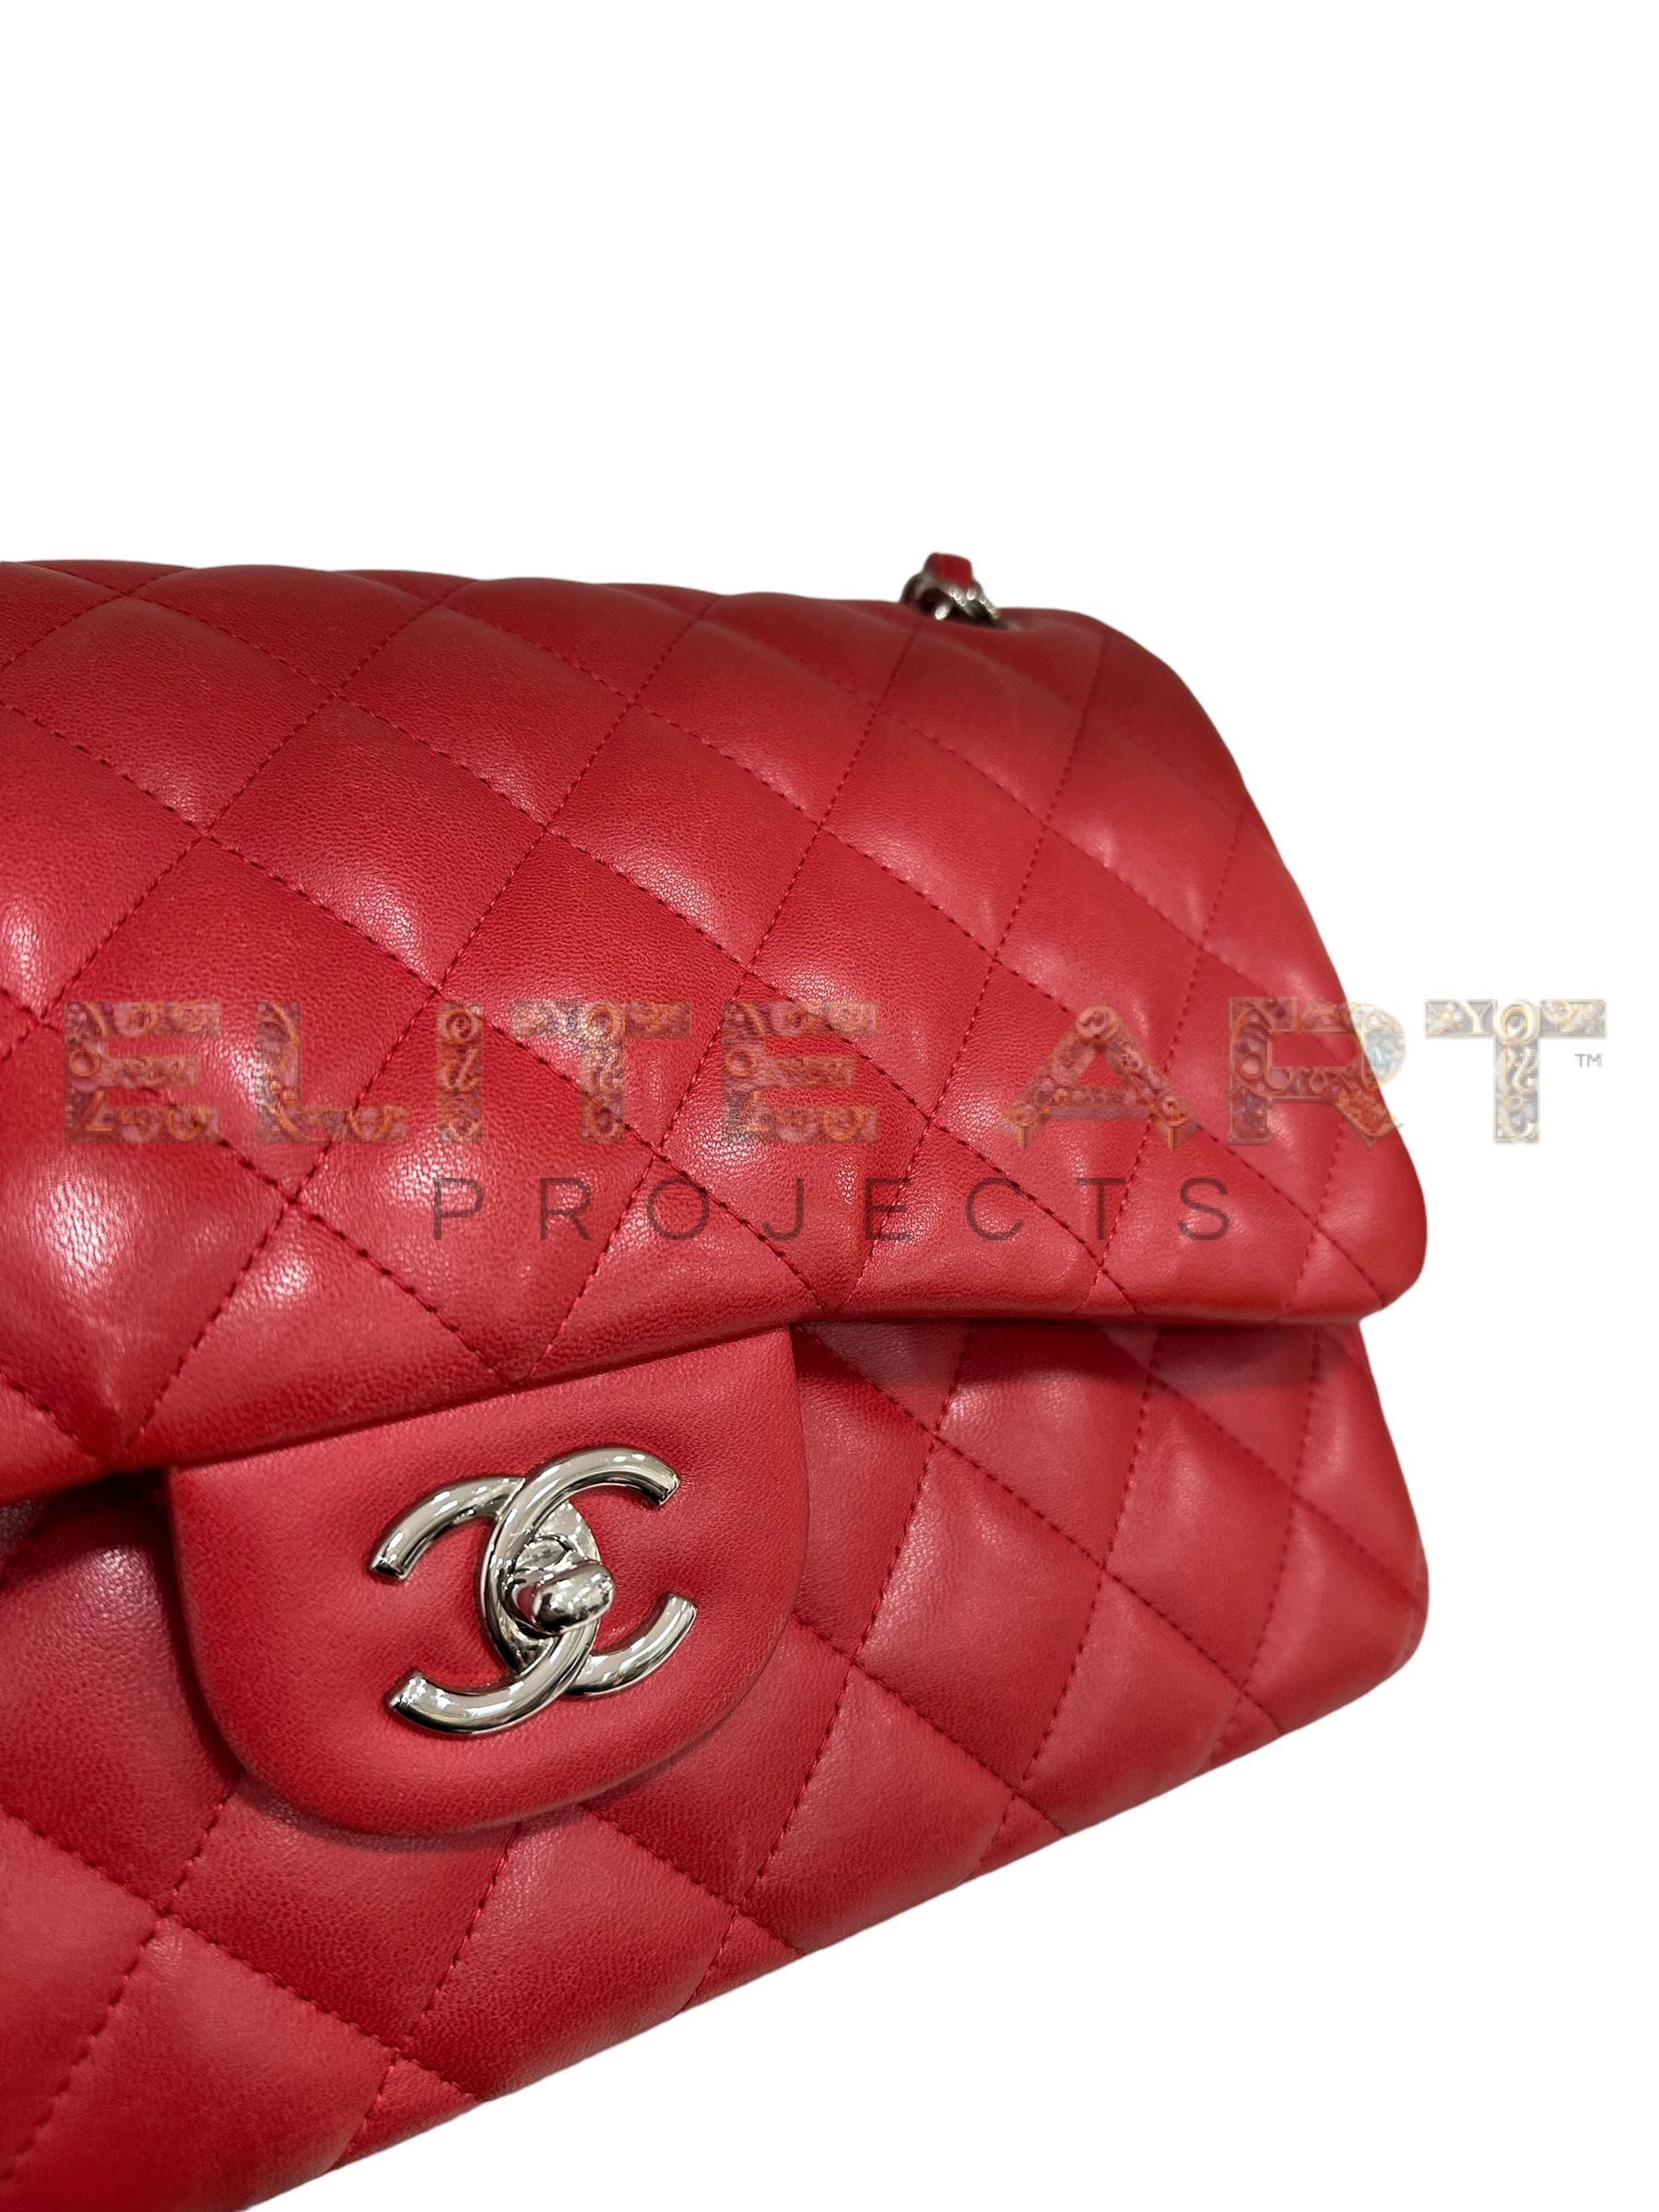 Jumbo Double Flap bag, quilted leather, red, silver inserts, elegance